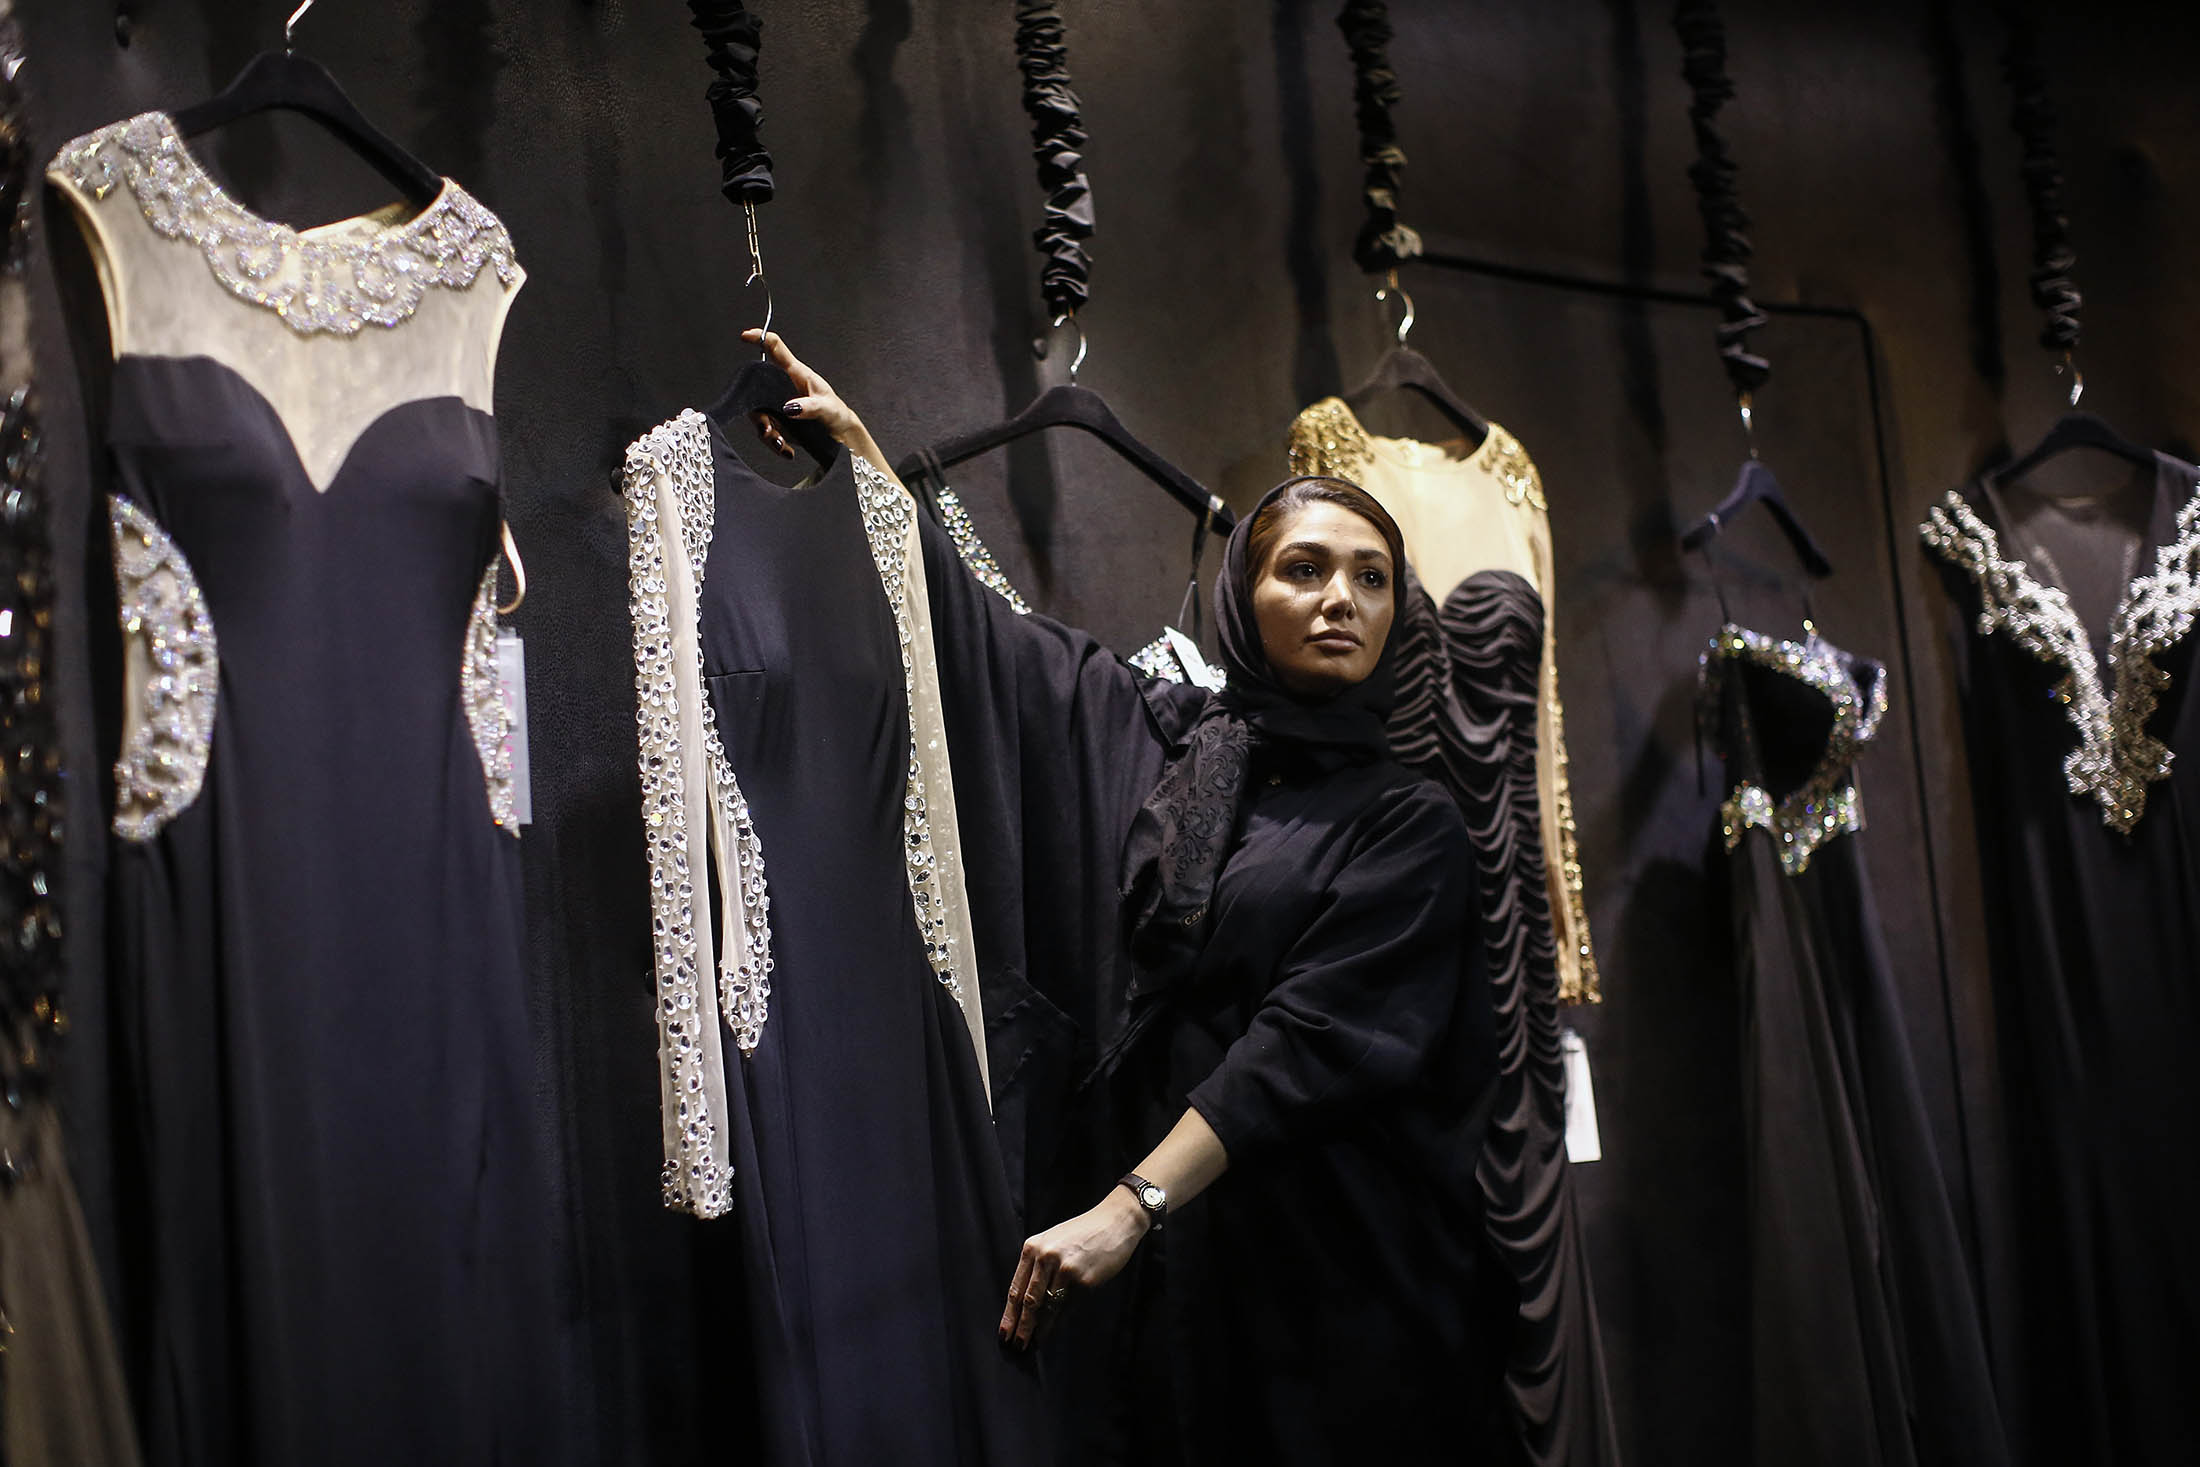 An employee displays a dress at a luxury fashion store inside the Isfahan City Center shopping mall in Isfahan, Iran.
